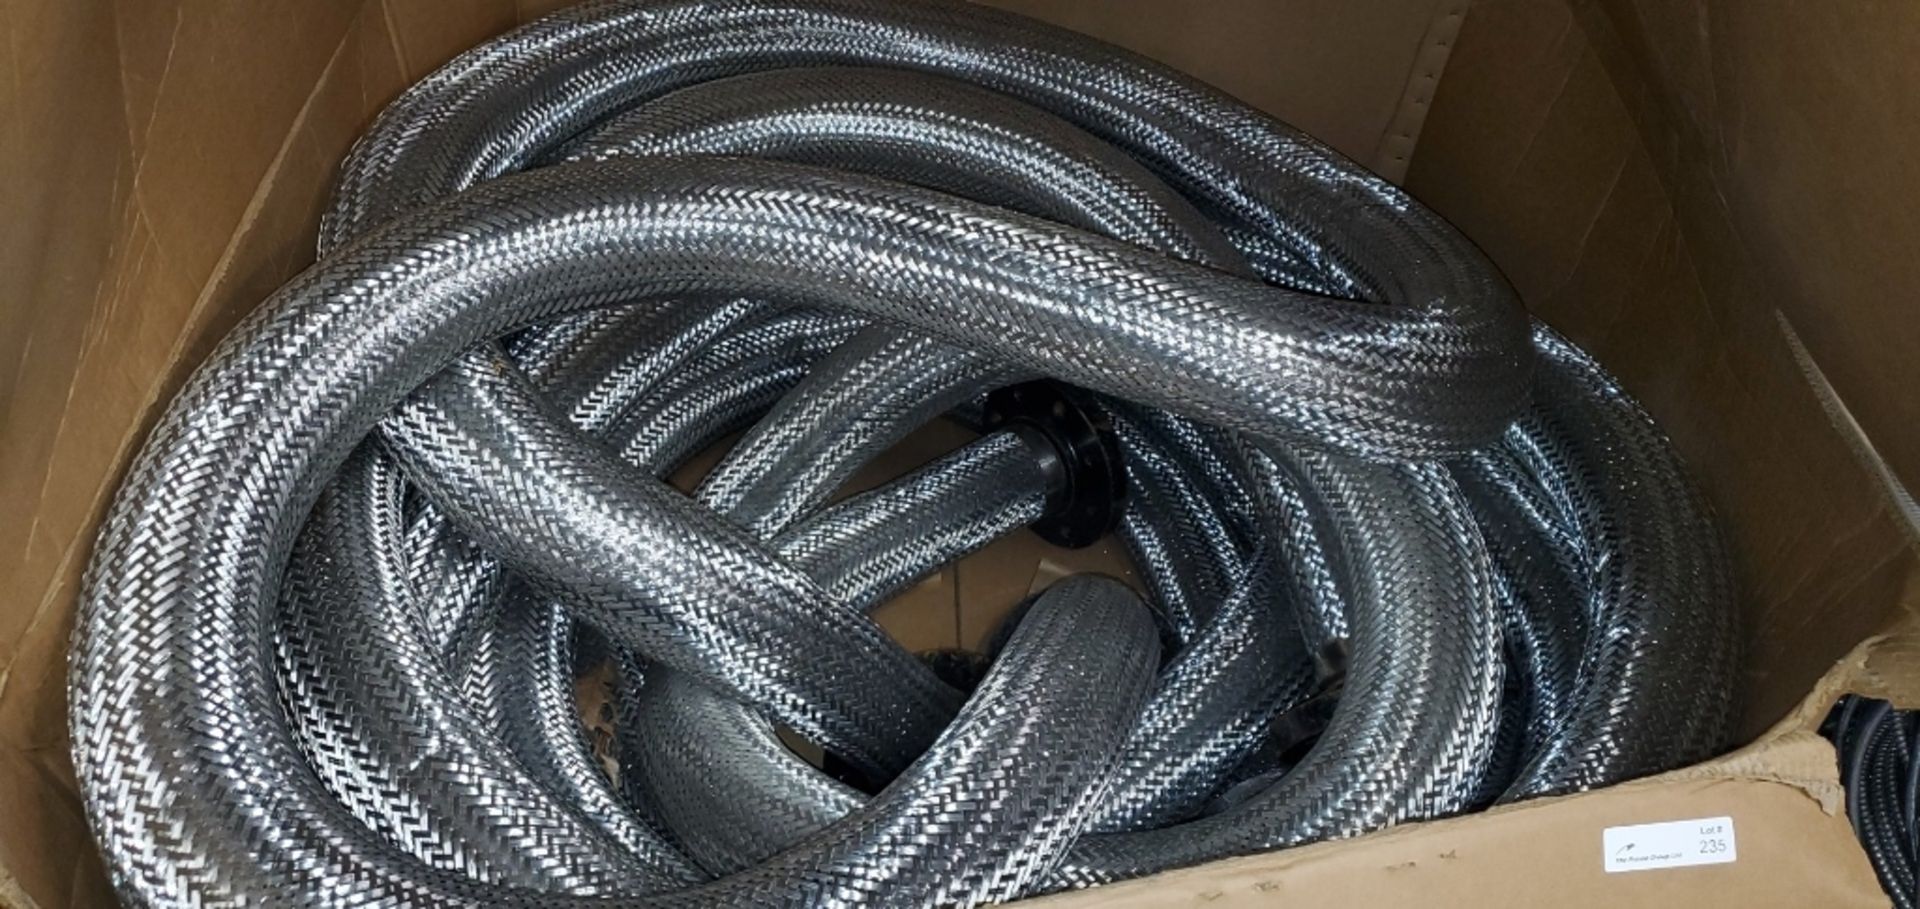 Skid Lot of 5 Dia Stainless Steel Braided Hoses" - Image 2 of 2